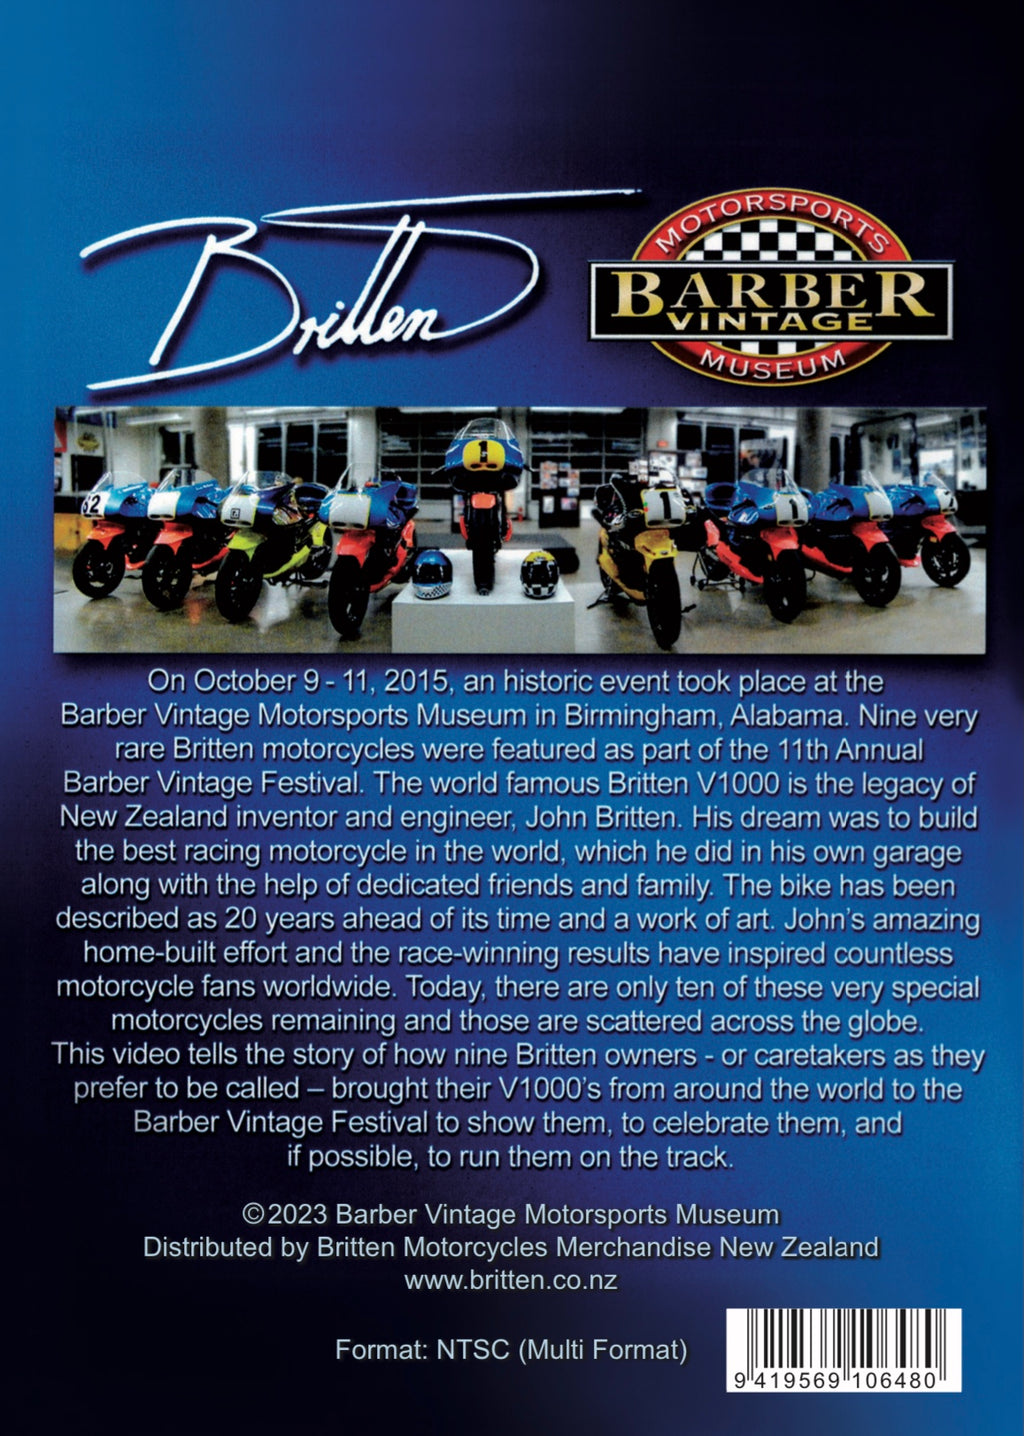 Brittens at Barber Documentary DVD